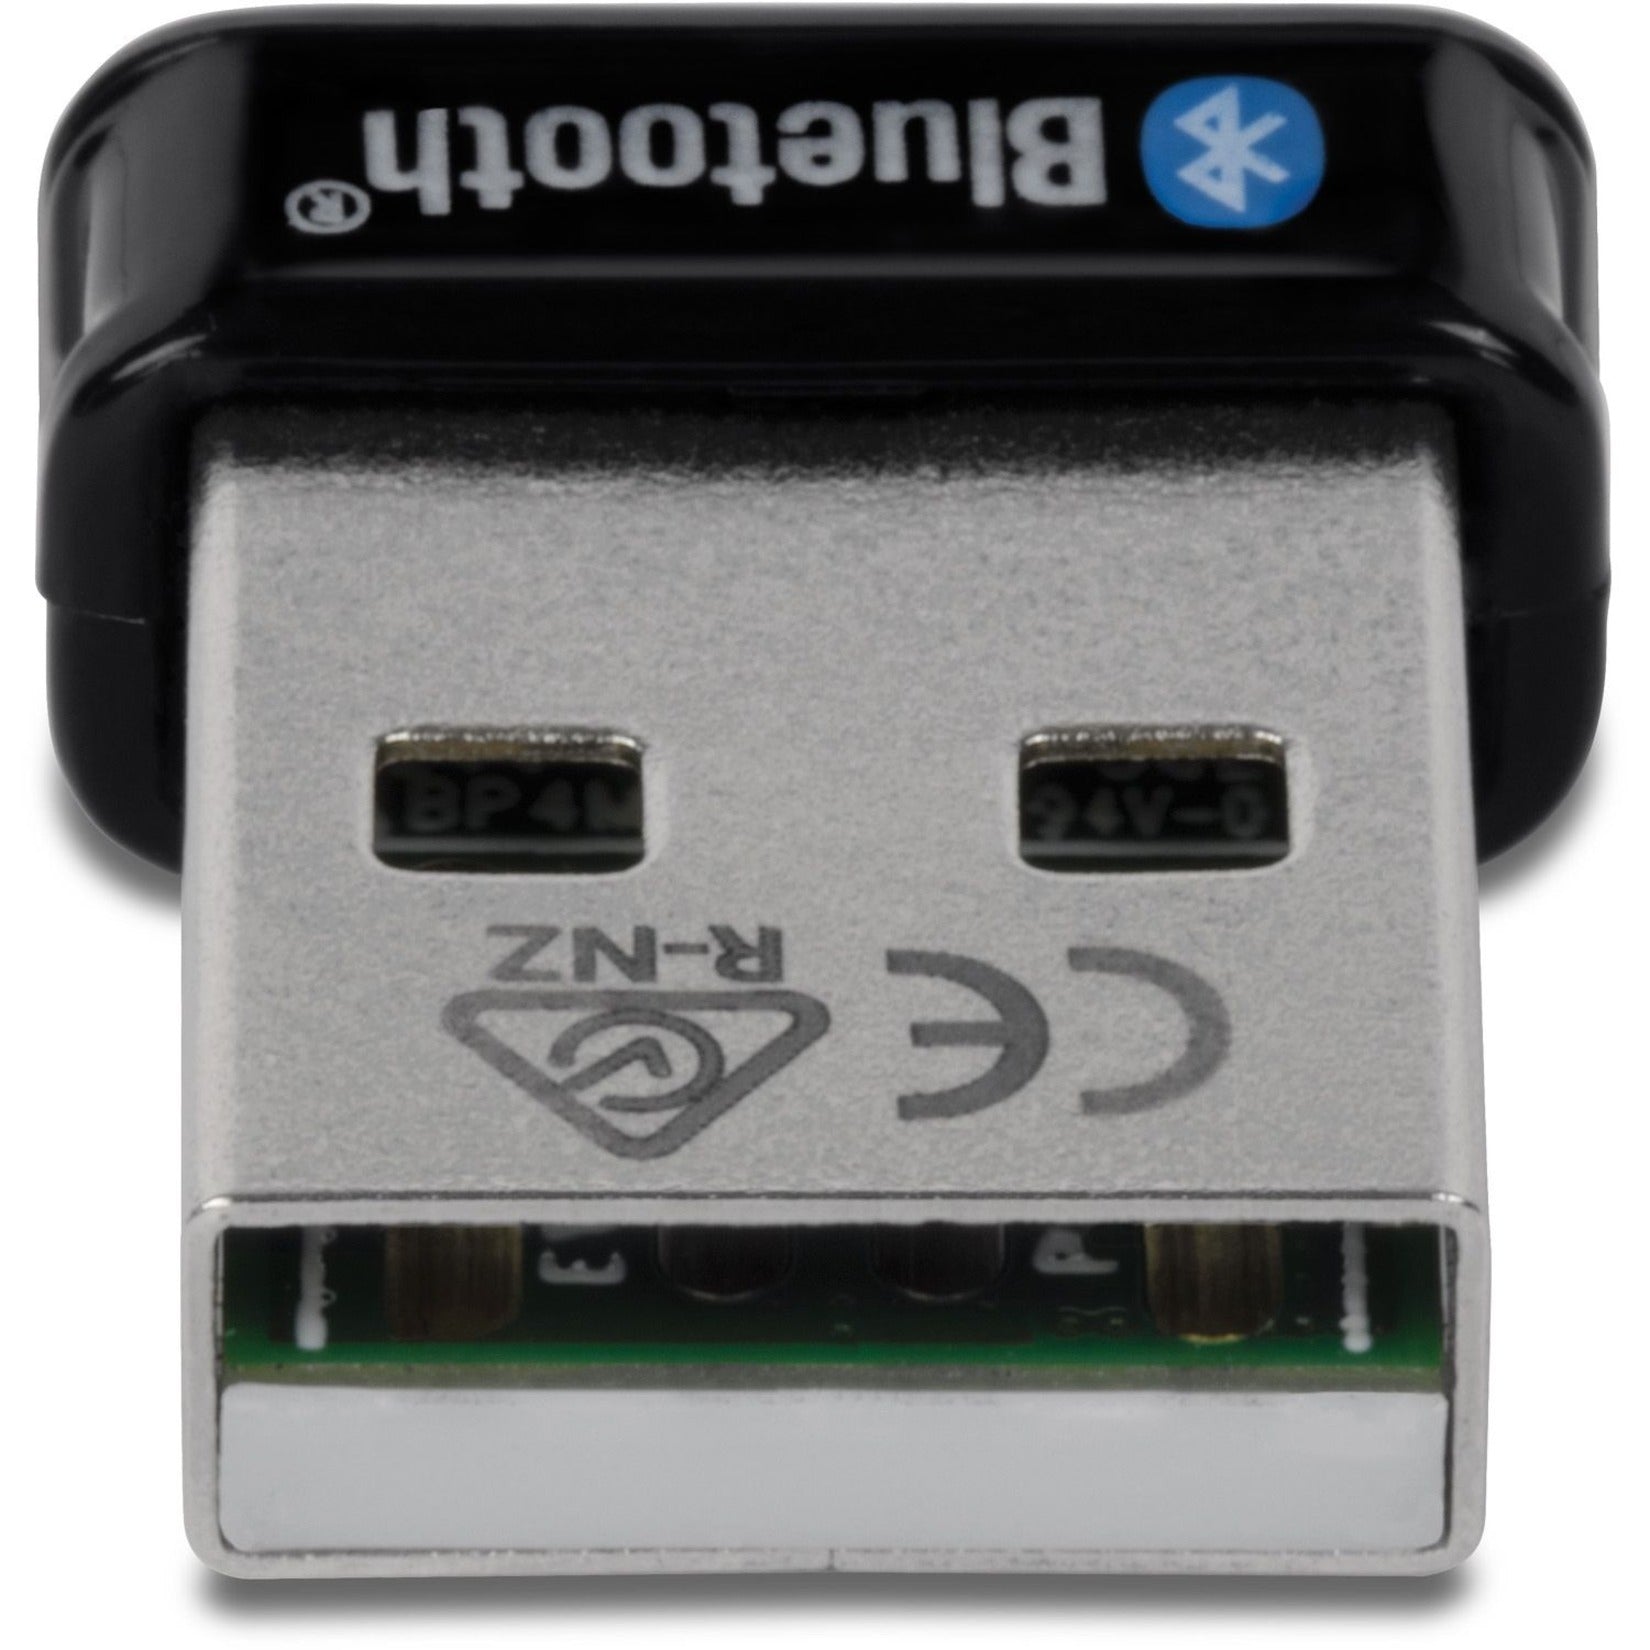 TRENDnet TBW-110UB Micro Bluetooth 5.0 USB Adapter with BR/EDR/BLE, Wireless NIC & Adapter